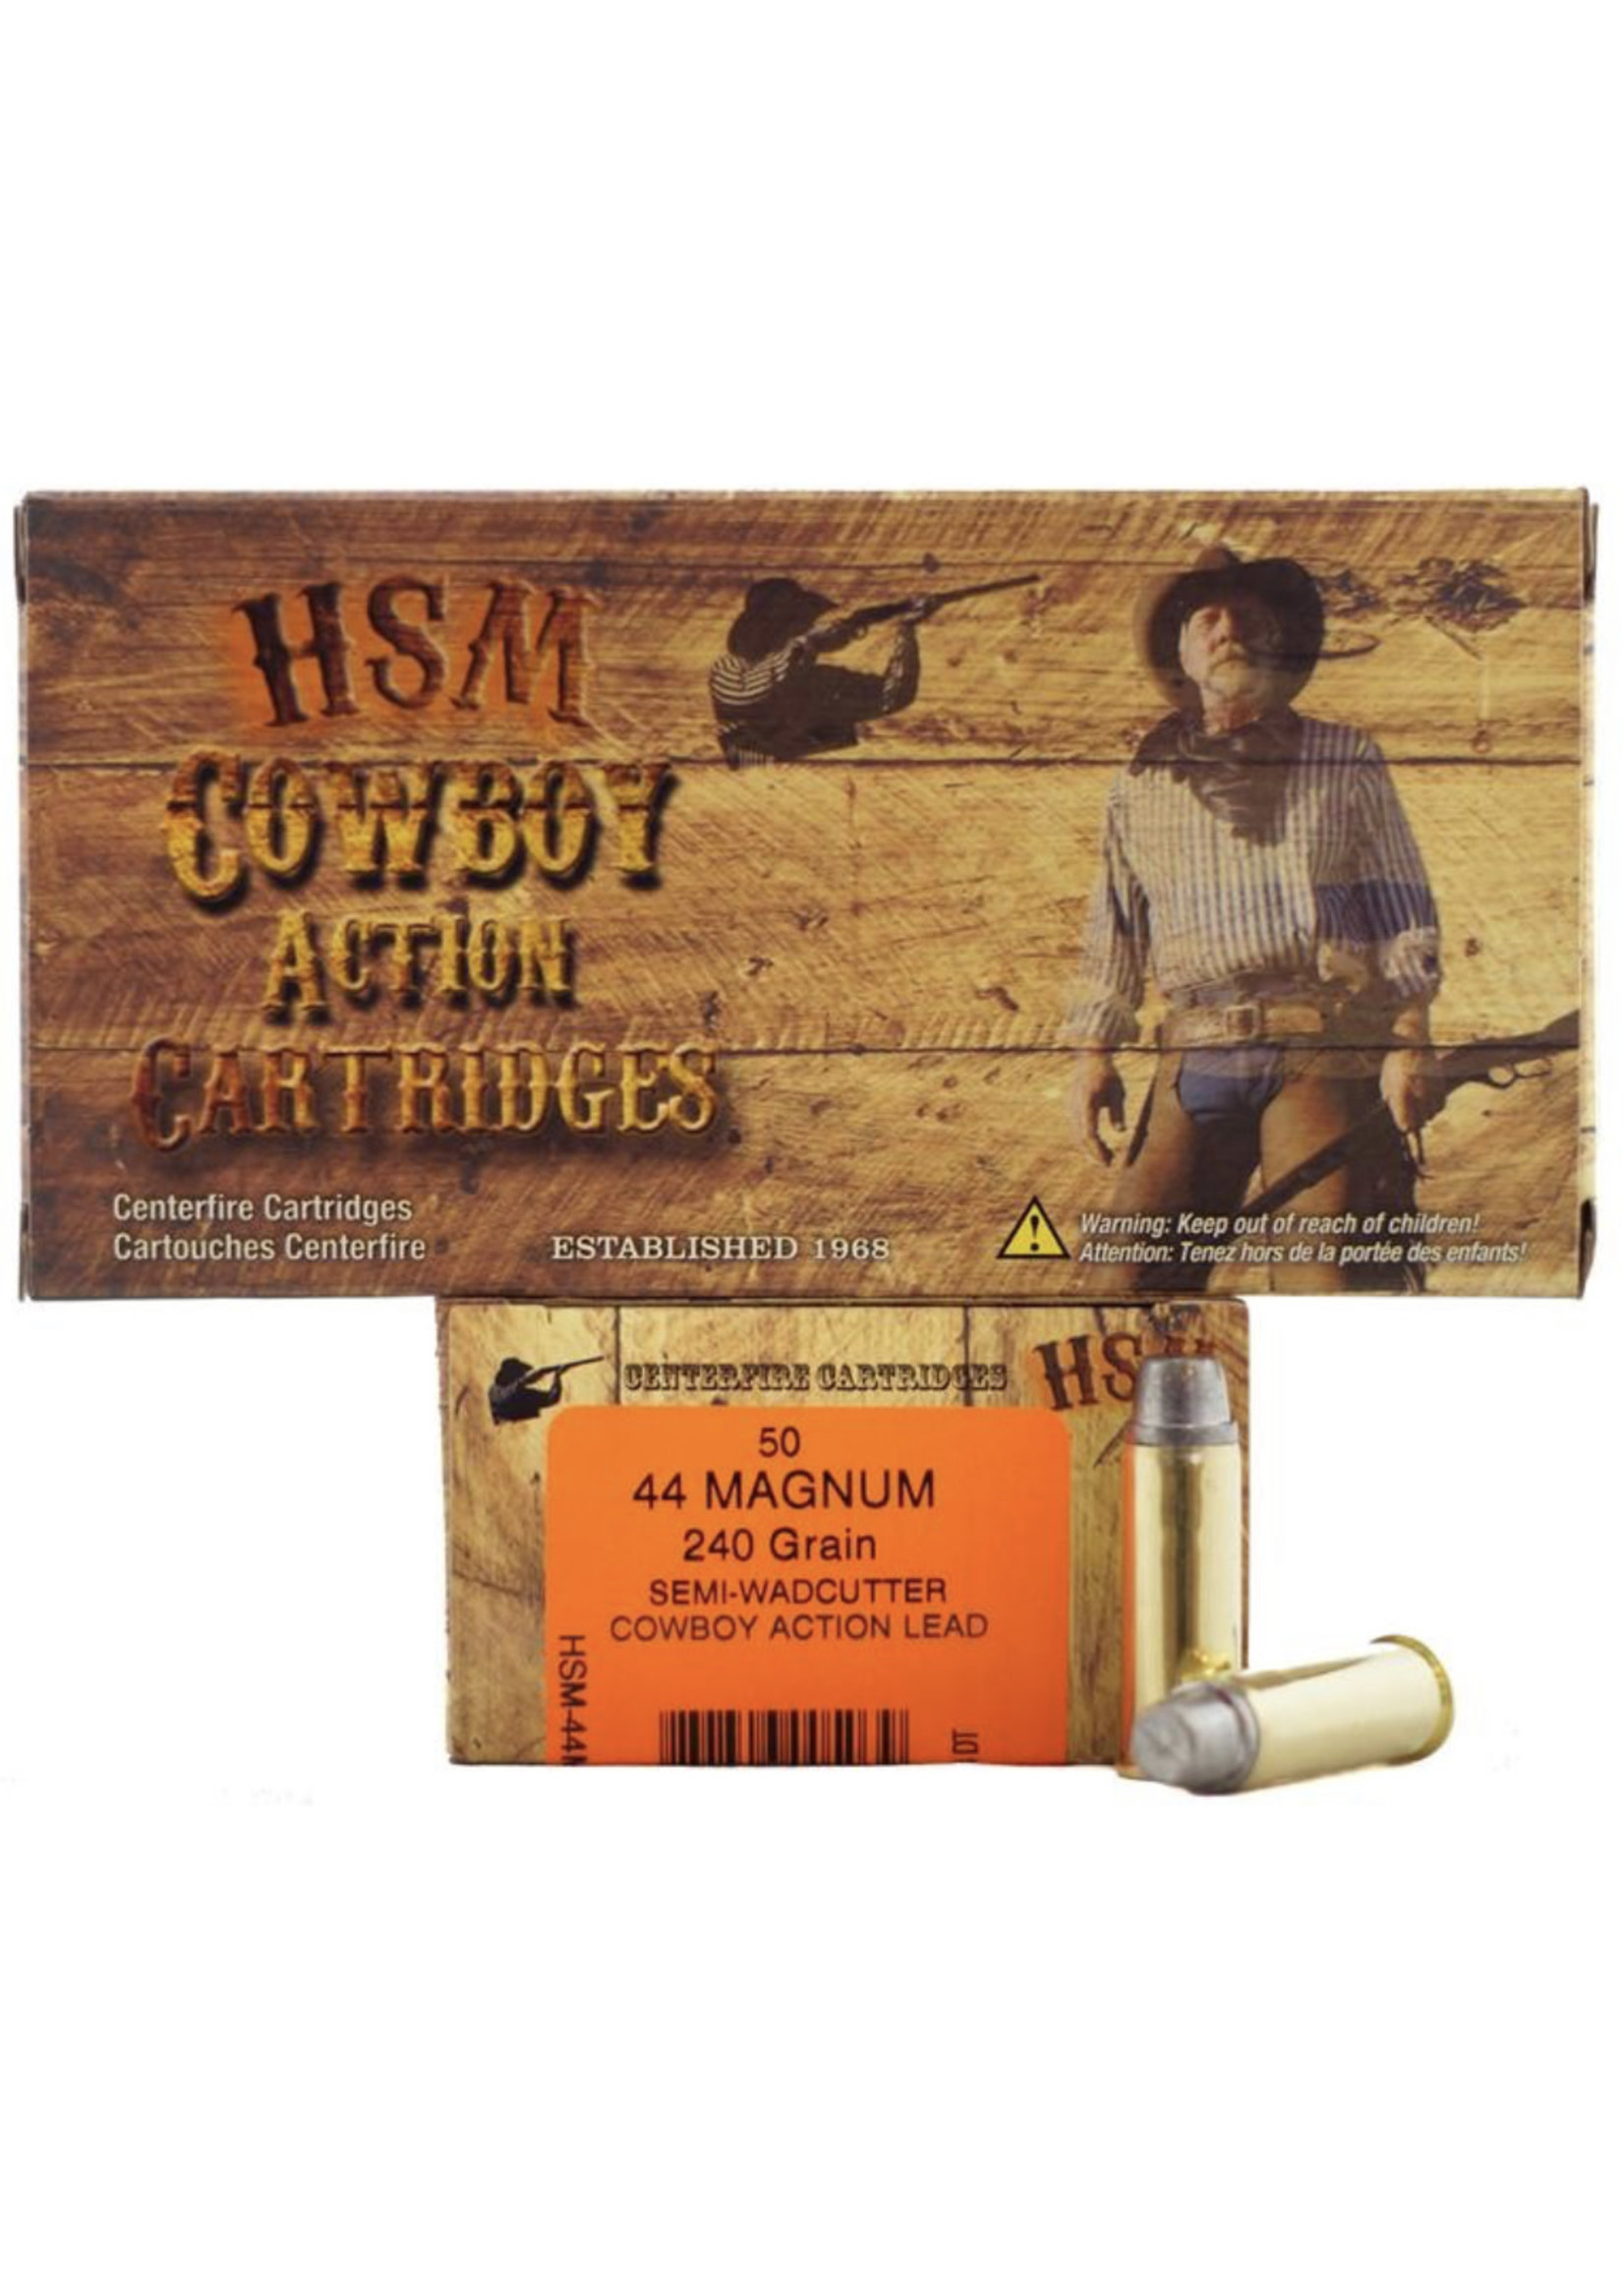 HSM HSM 44 MAG 240 GR SWC COWBOY ACTION LEAD SMALL PRIMER 50 RDS